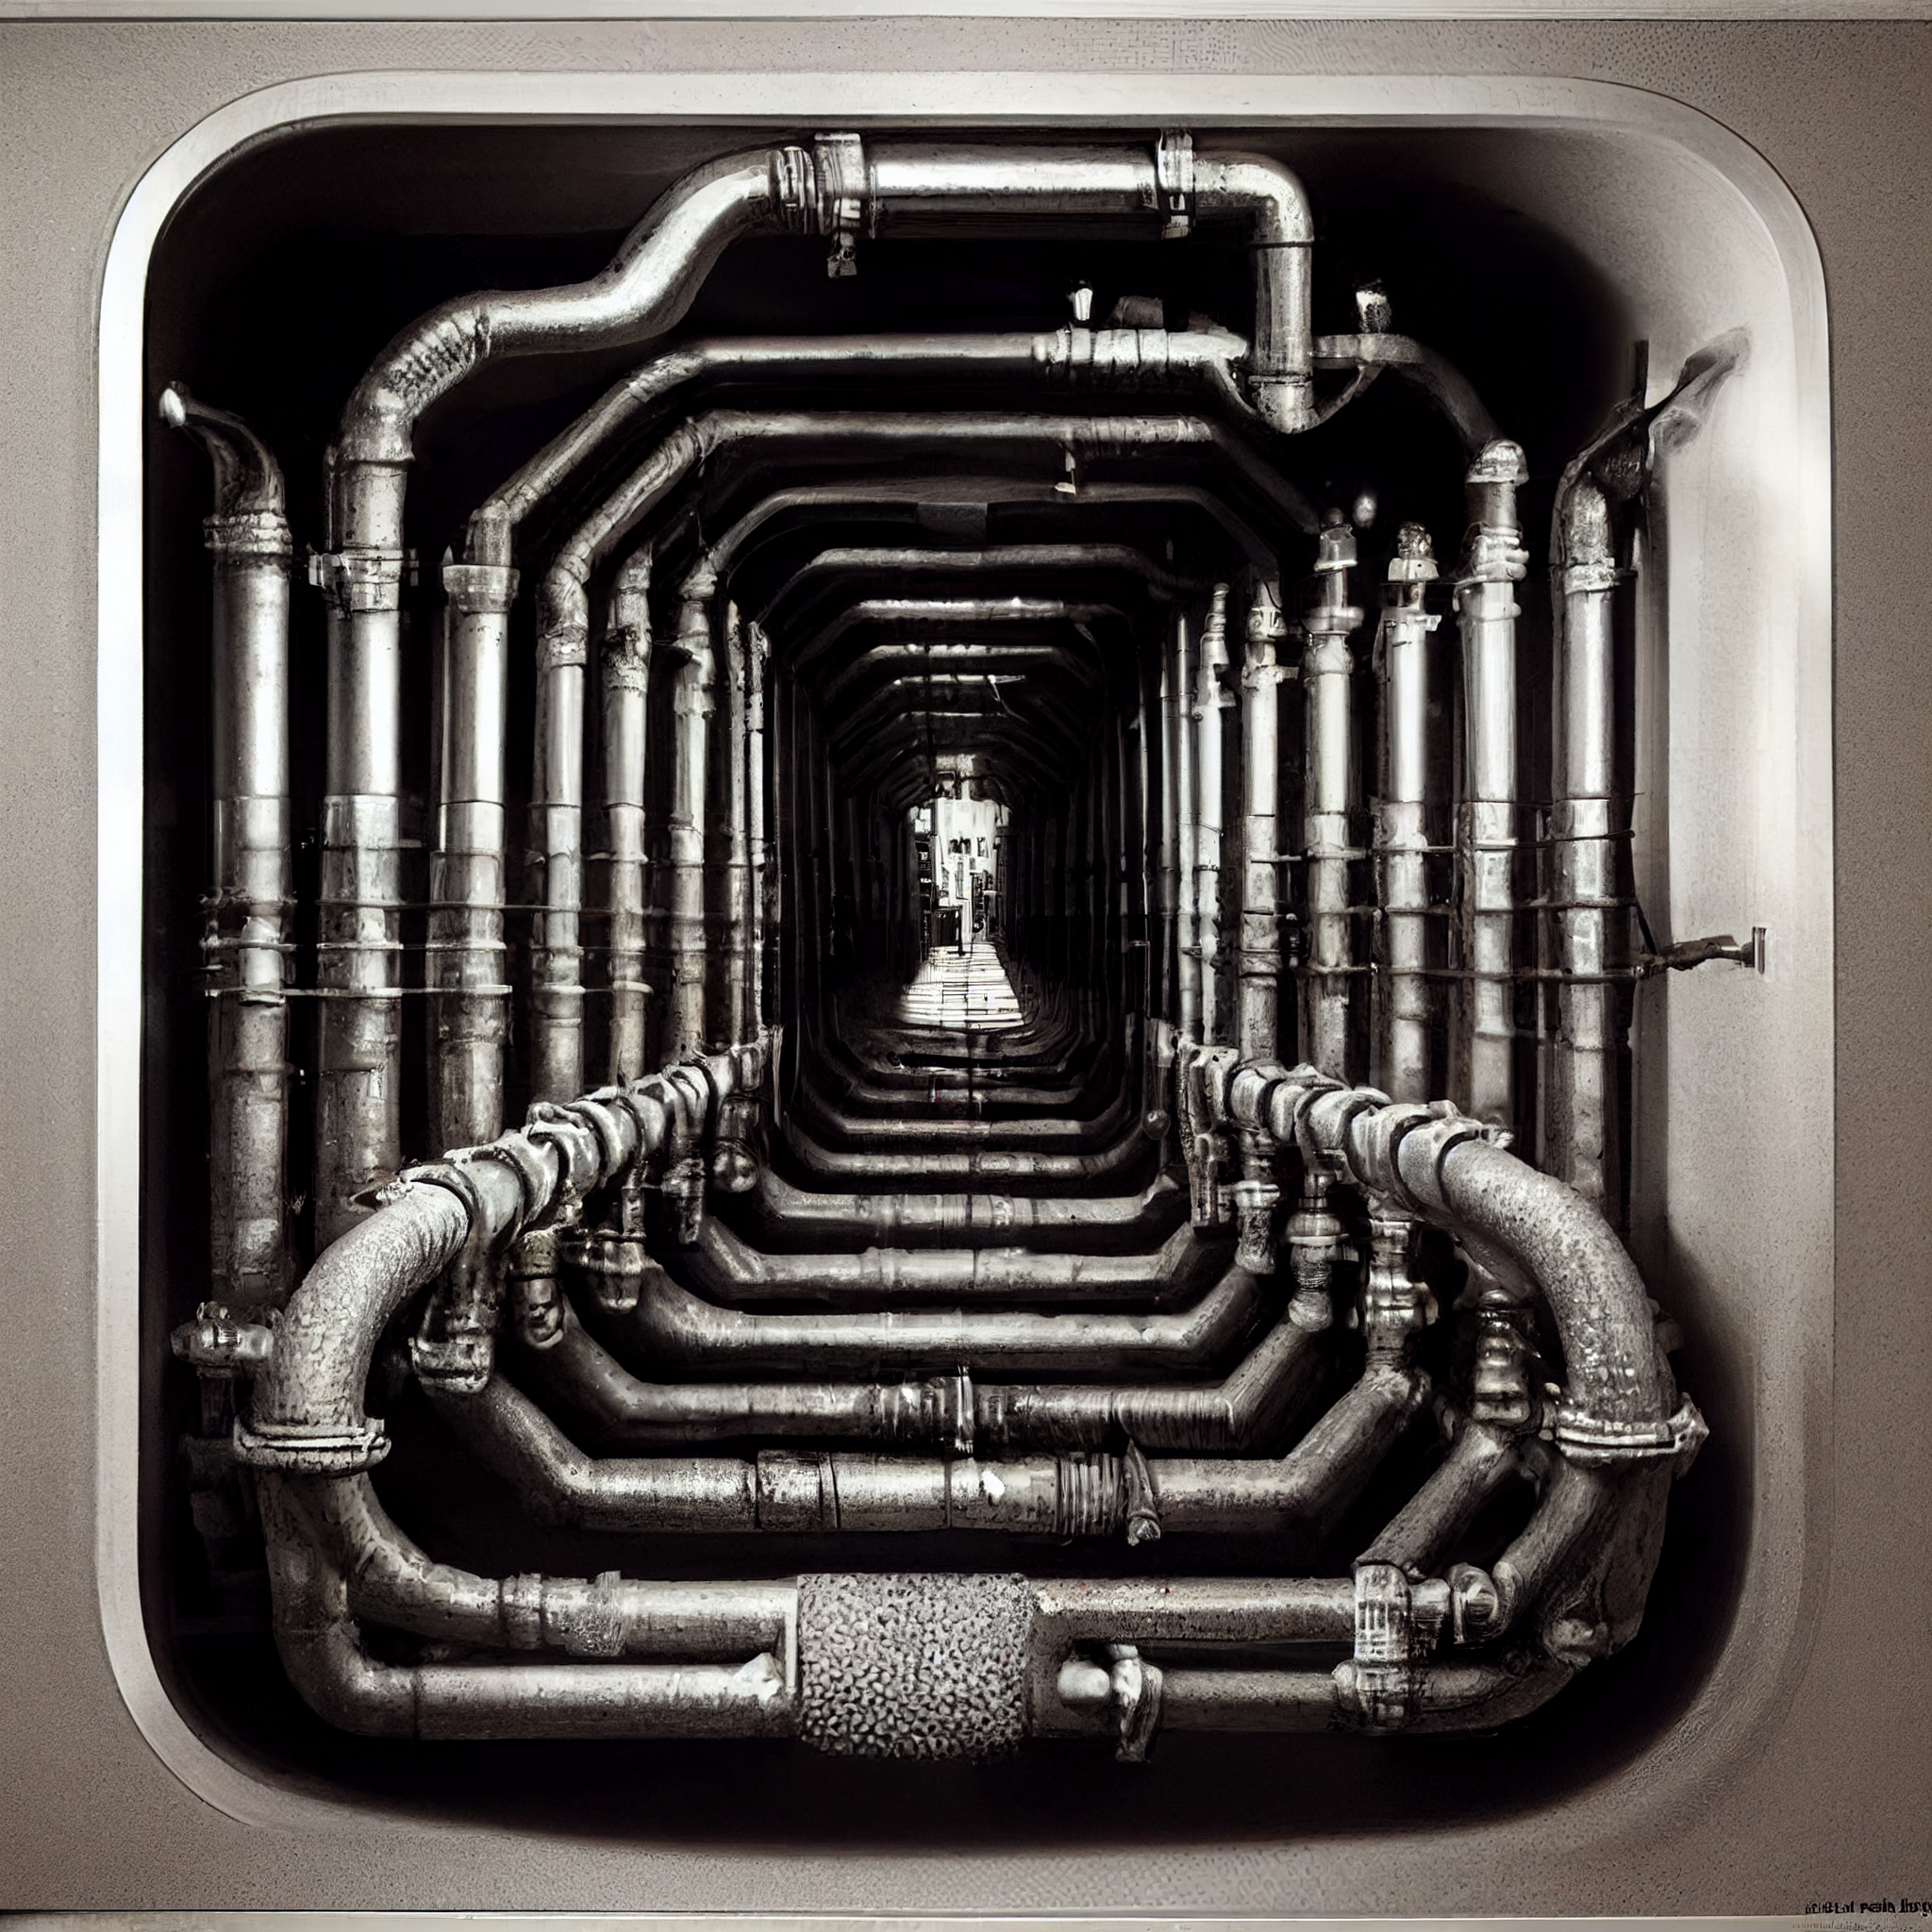 EricdeBroche_Crazy_pipes_like_a_labyrinth_under_the_sink_photog_656e6157-b7d6-4480-8f86-2192c087b71d.png